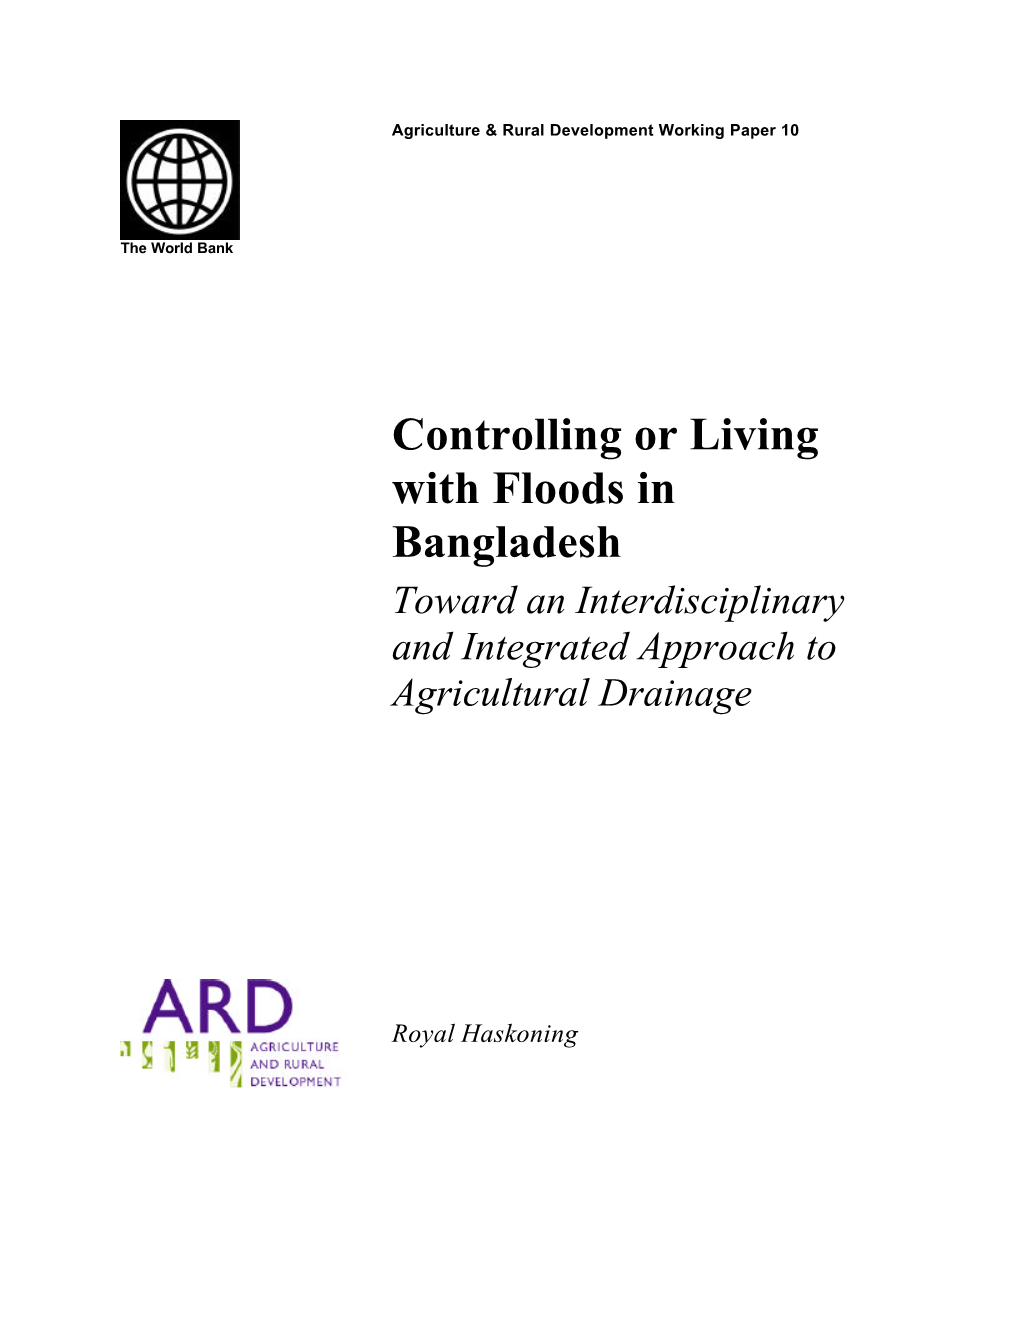 Controlling Or Living with Floods in Bangladesh Toward an Interdisciplinary and Integrated Approach to Agricultural Drainage